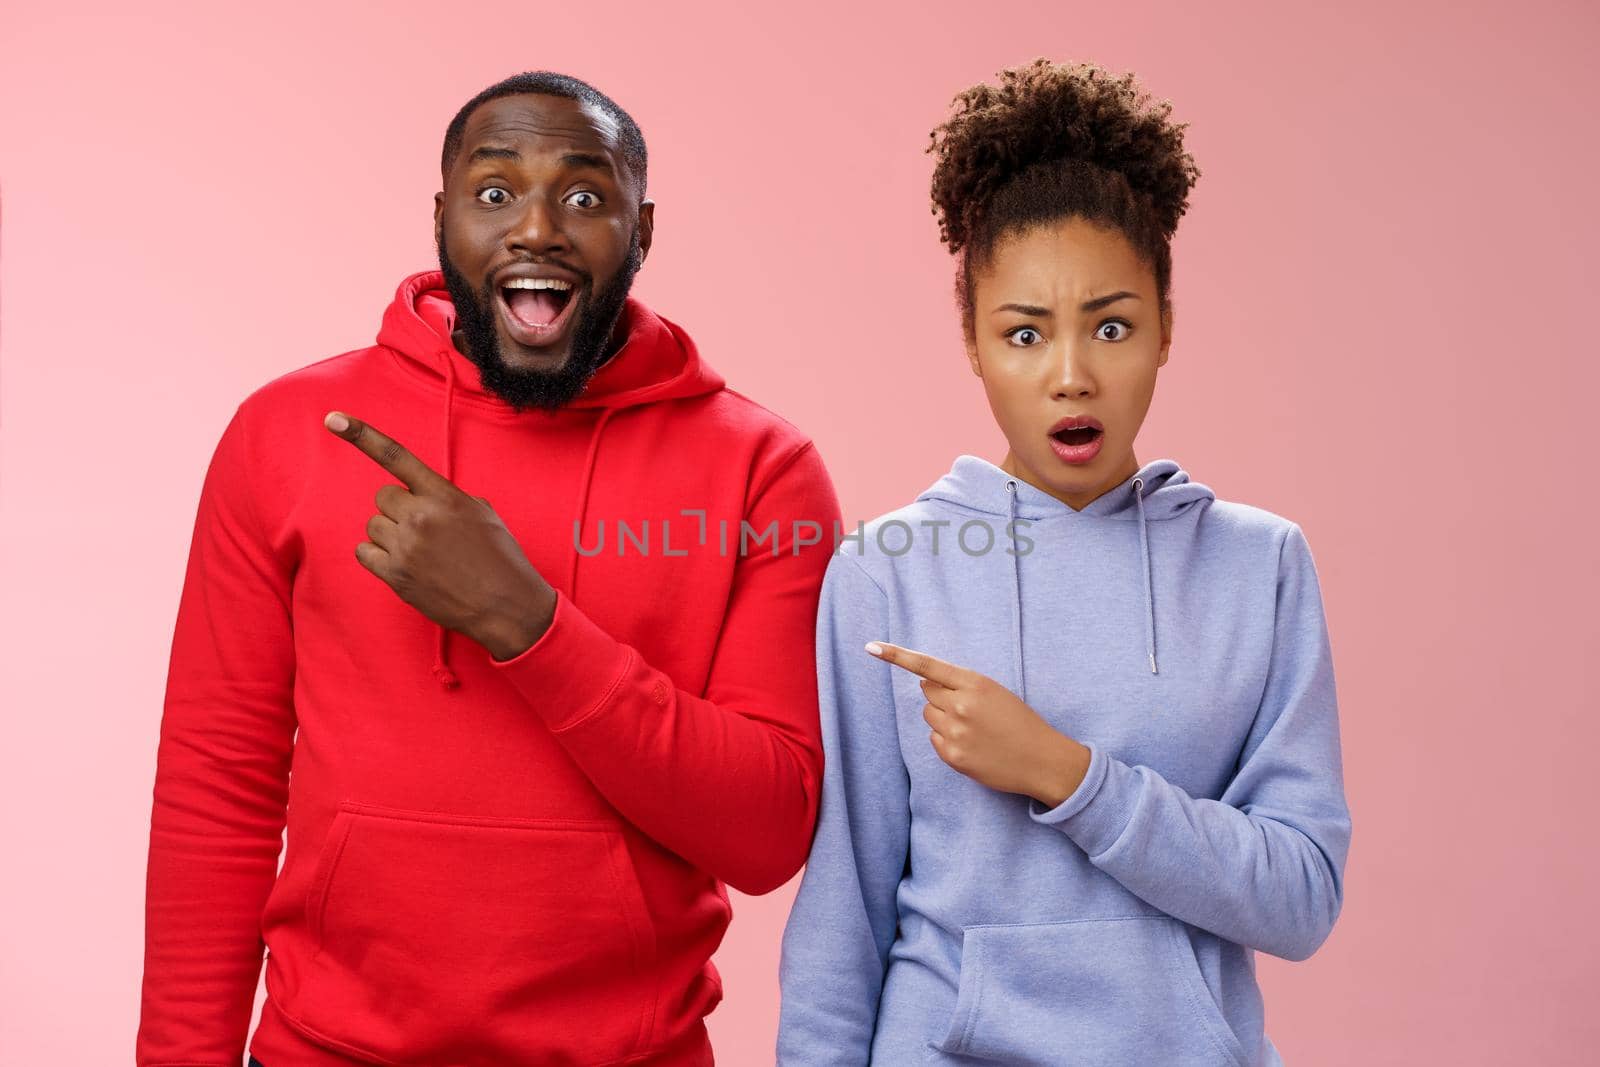 Girlfriend shocked boyfriend friends made surprise party look frustated displeased pointing upper left corner man feeling amazed thankful smiling delighted standing pink background.